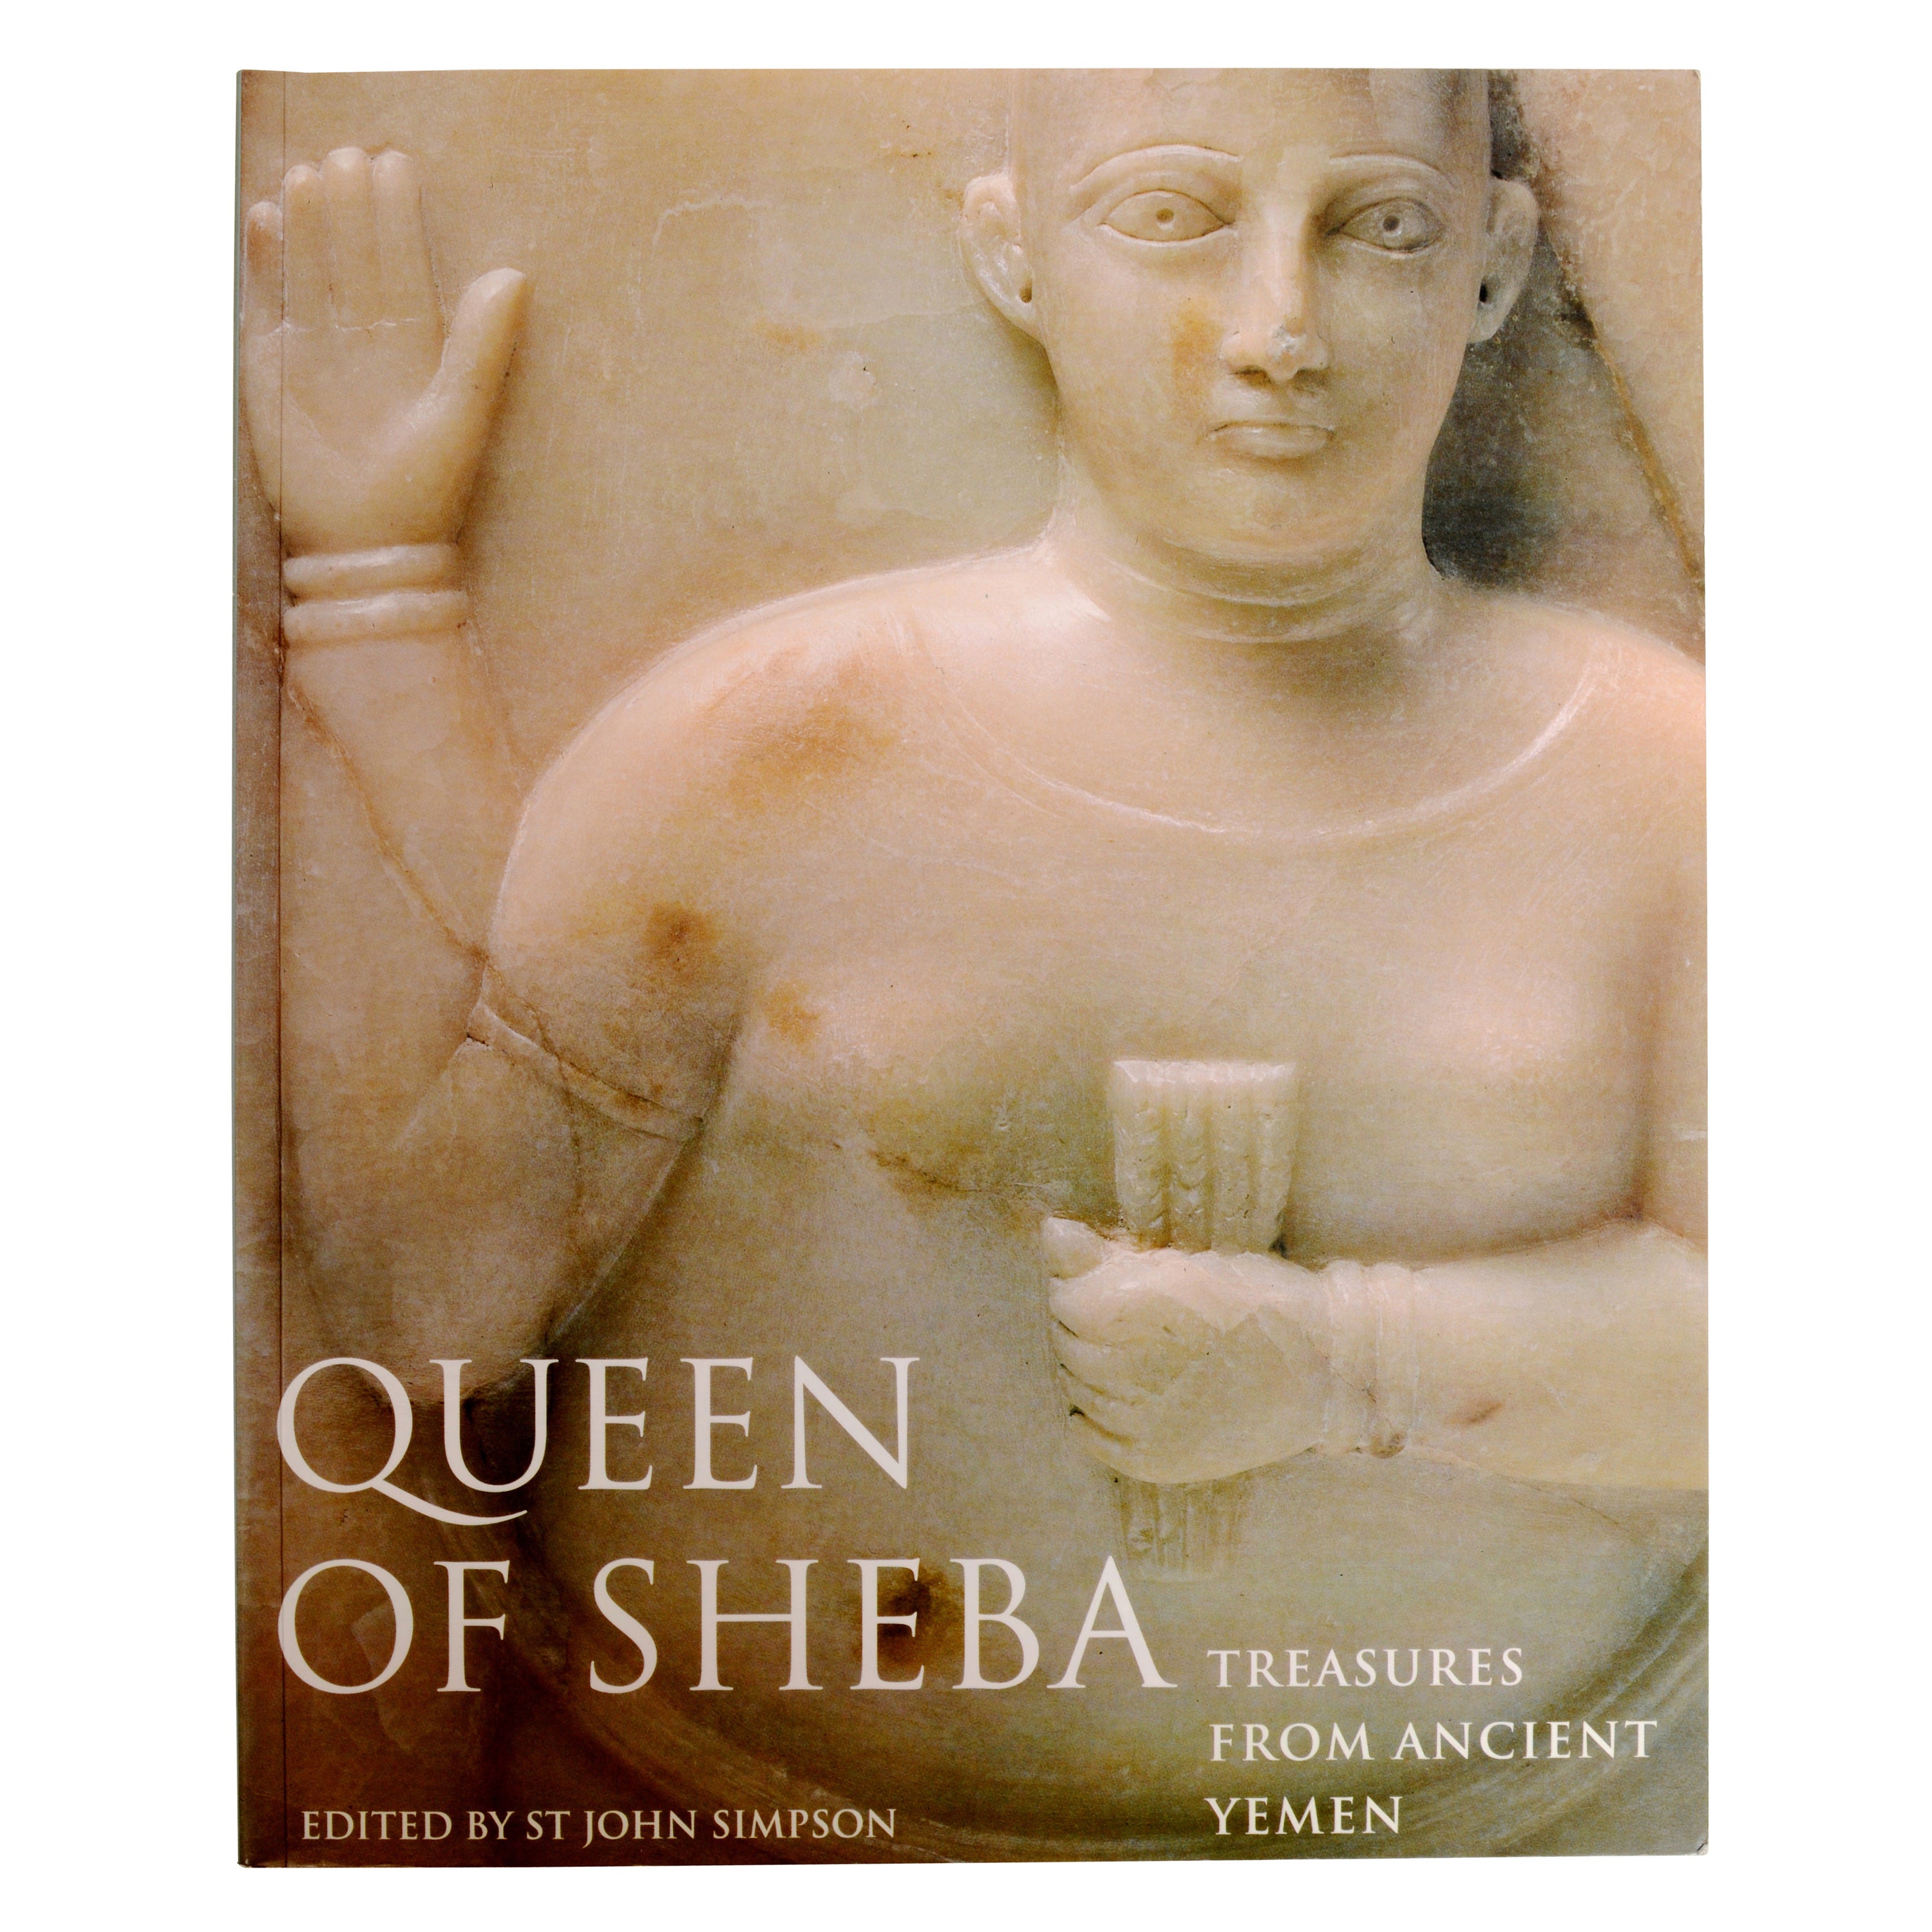 Queen of Sheba: Treasures from Ancient Yemen Edited by St. John Simpson